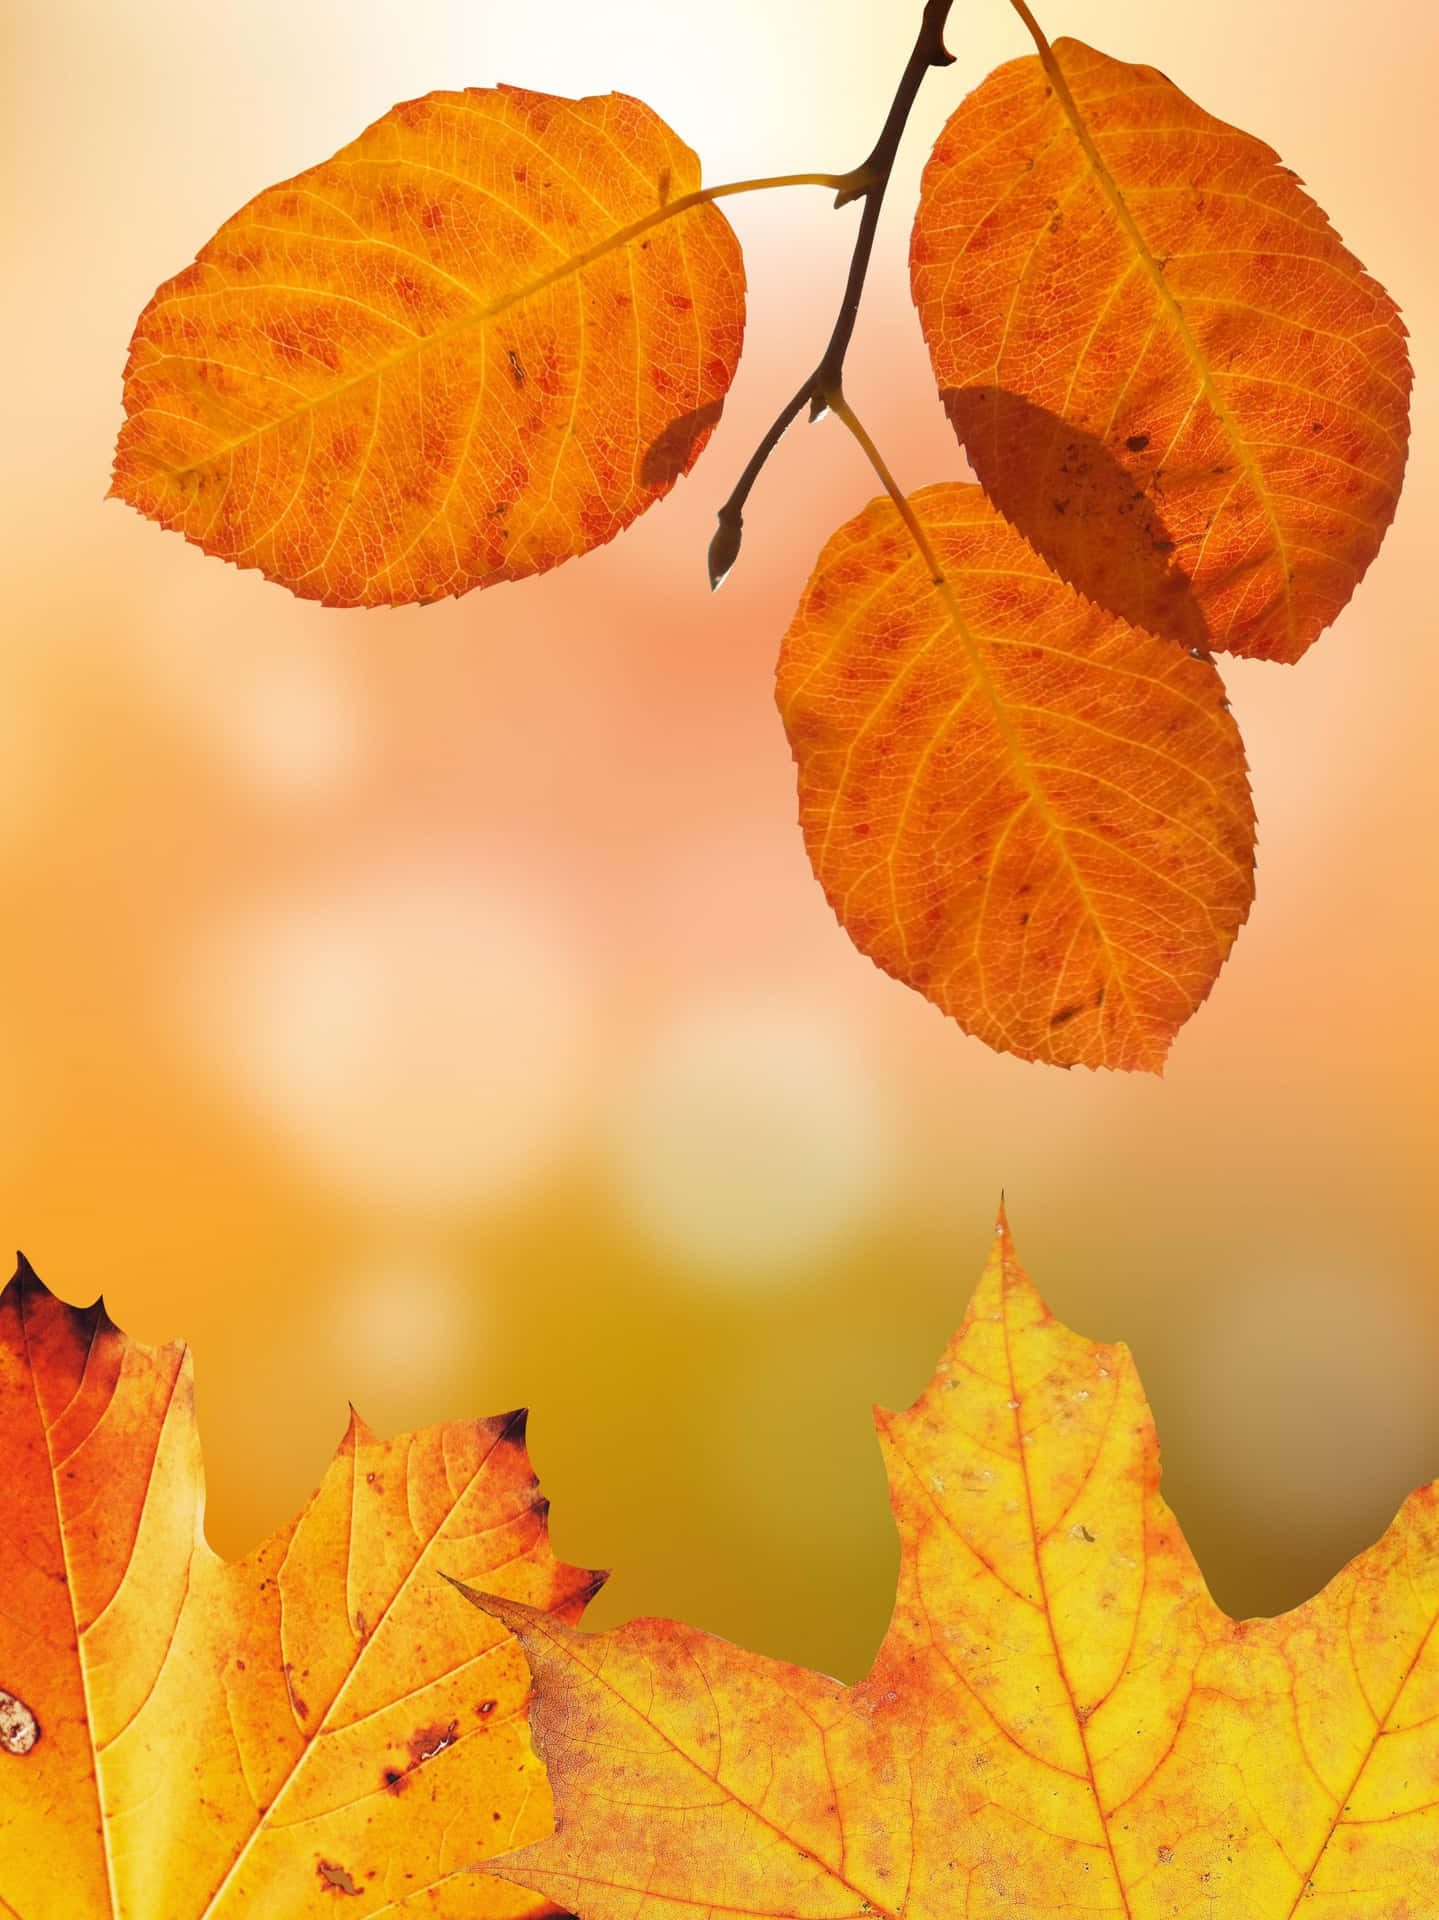 Autumn Leaves On A Branch With A Blurred Background Wallpaper